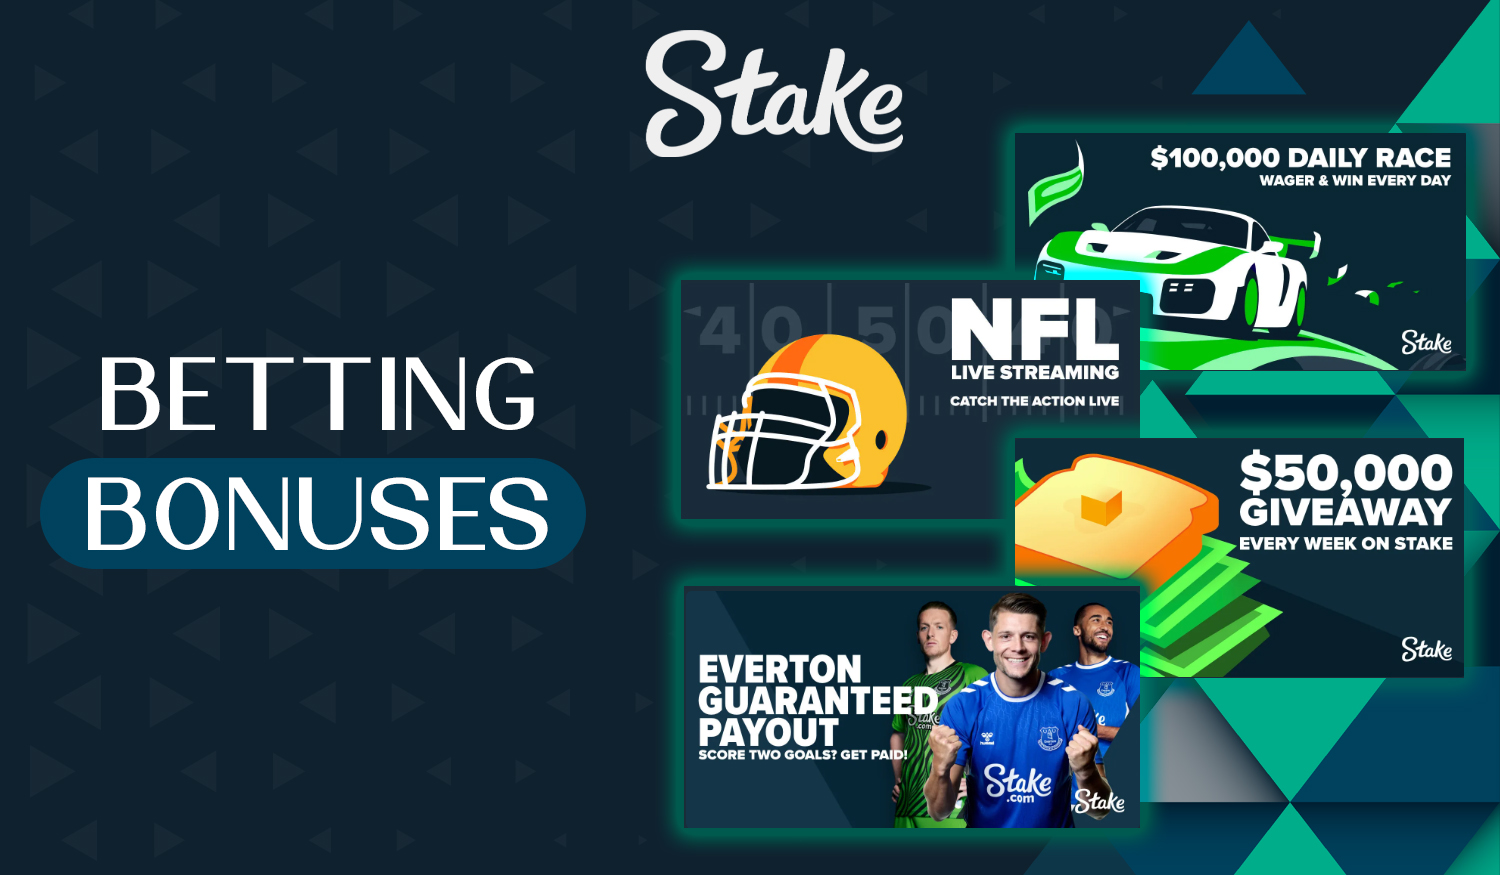 What bonuses are available on Stake's bookmaker website after making a deposit